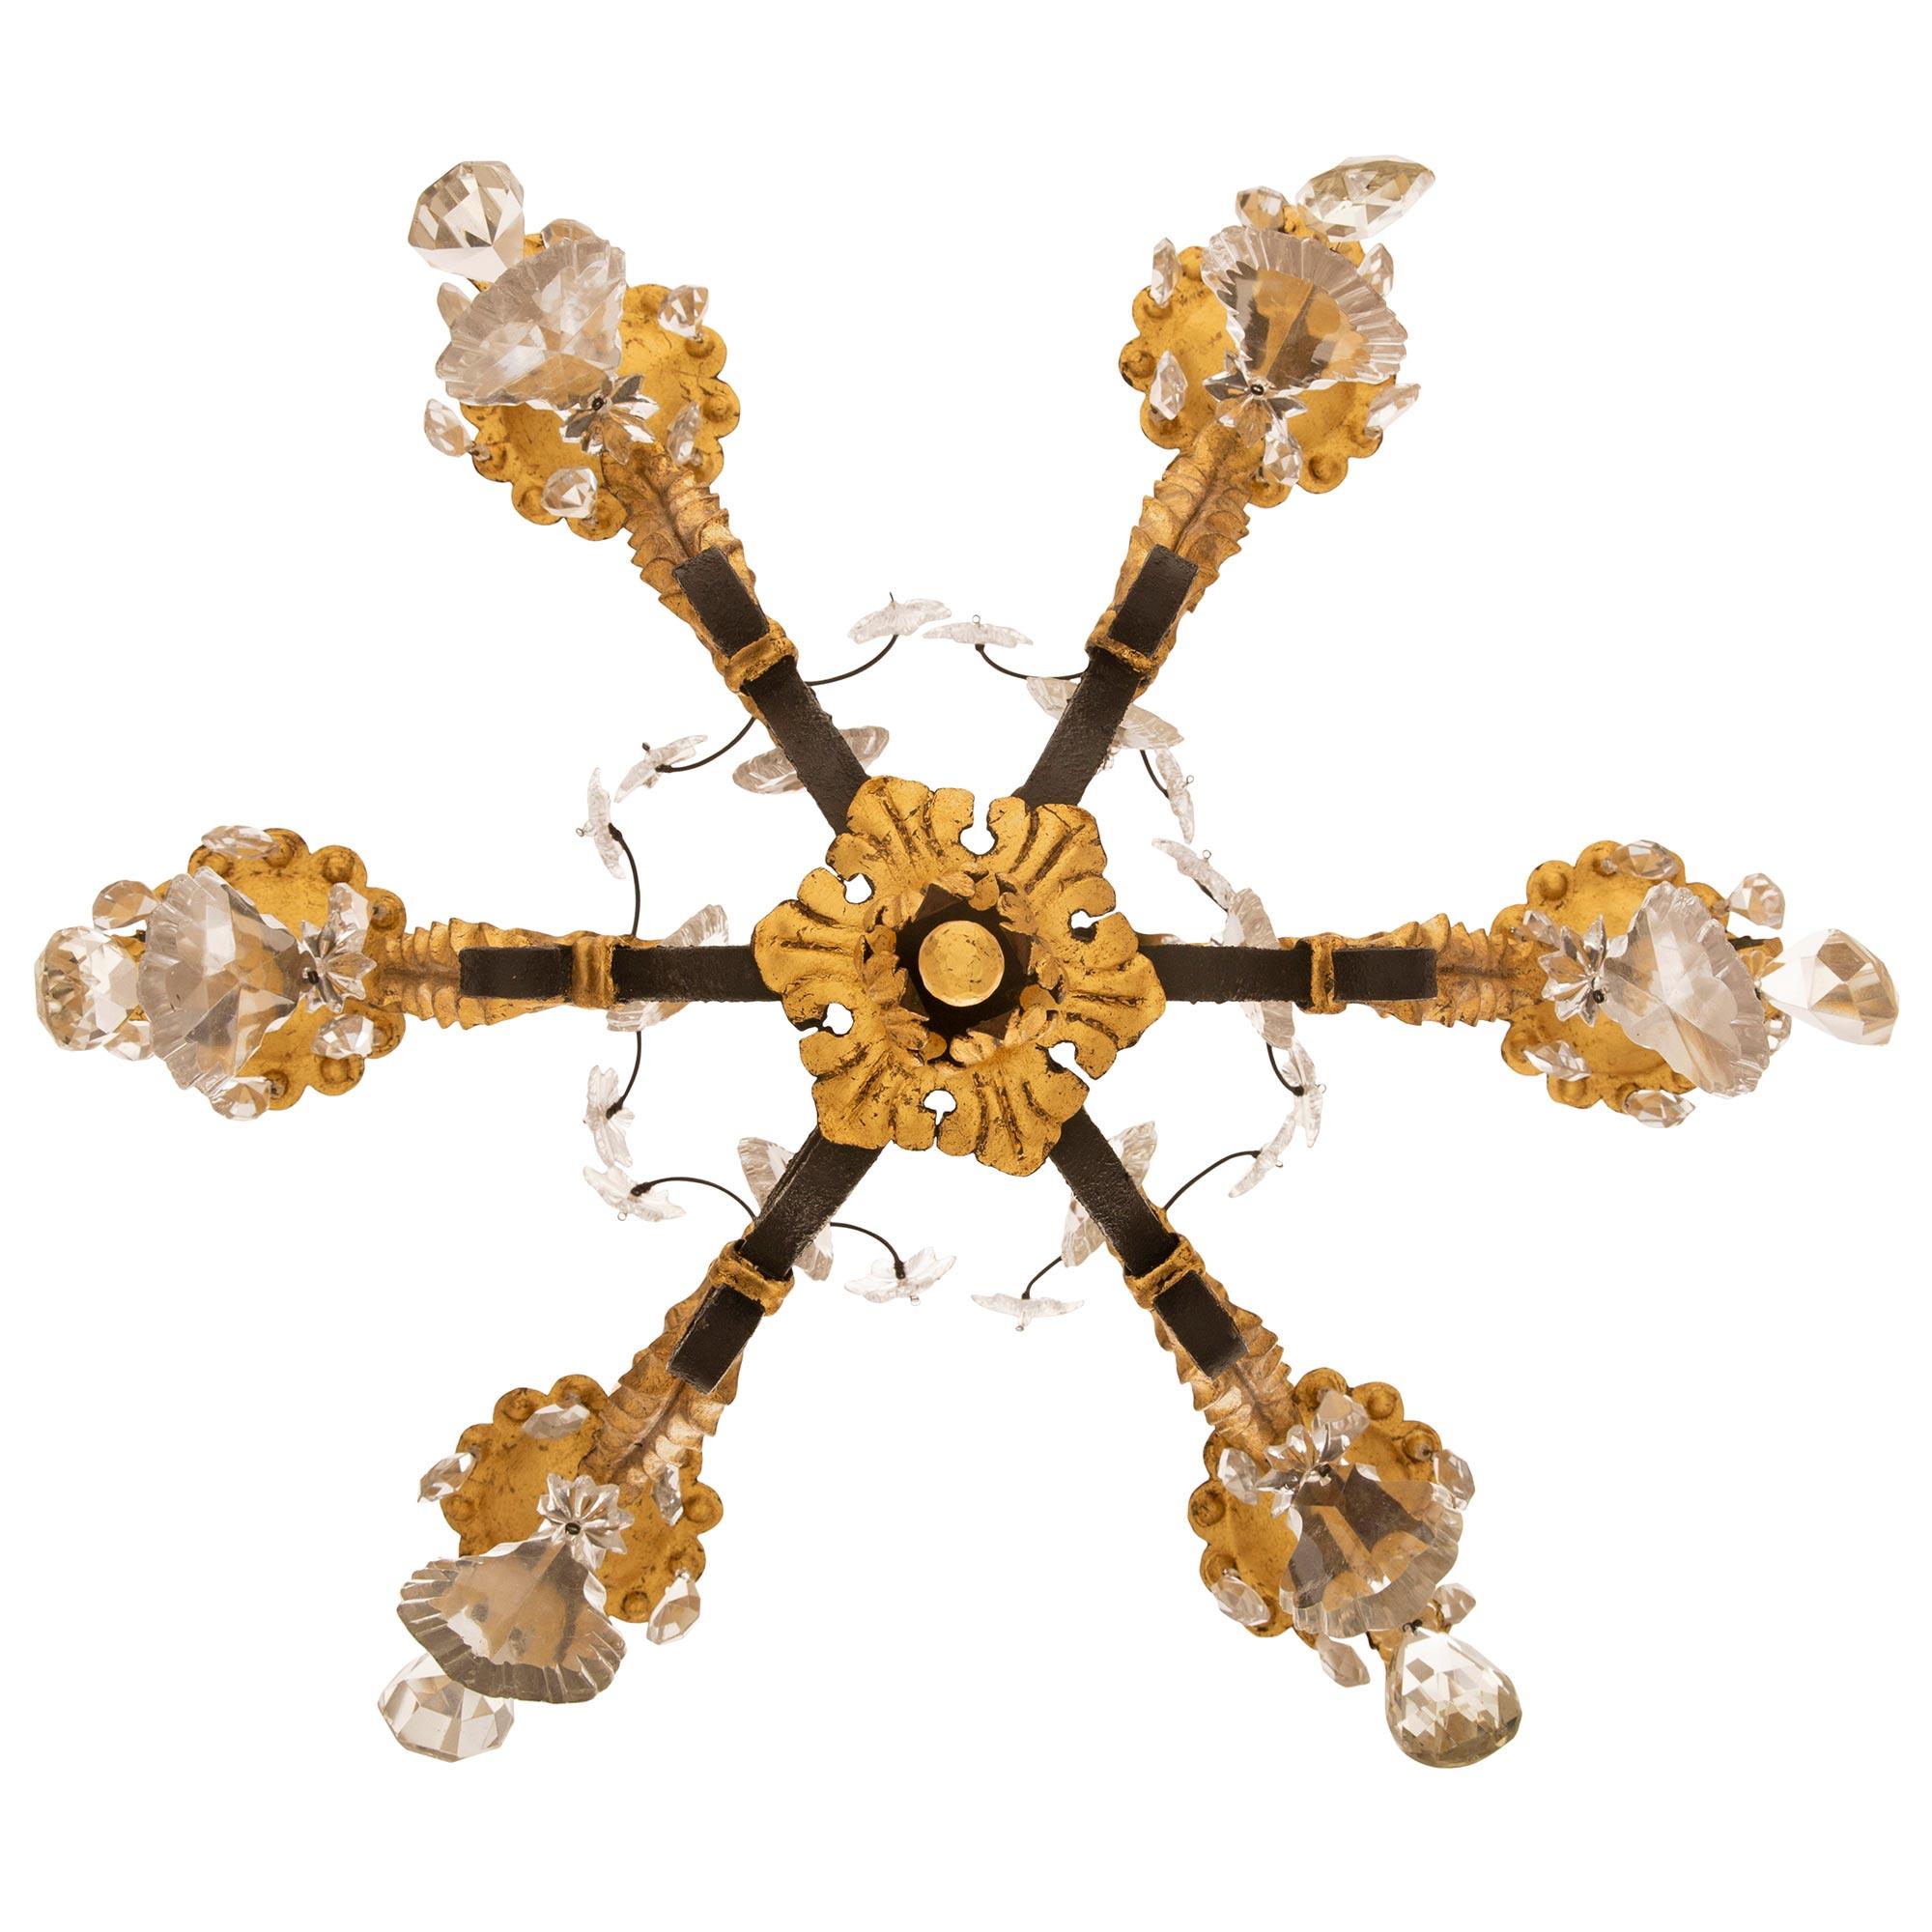 A beautiful Country French 19th century Louis XV st. wrought iron, gilt metal and crystal chandelier. The six arm chandelier is centered by a lovely gilt metal floral bottom finial with lovely most decorative scrolled wrought iron movements adorned